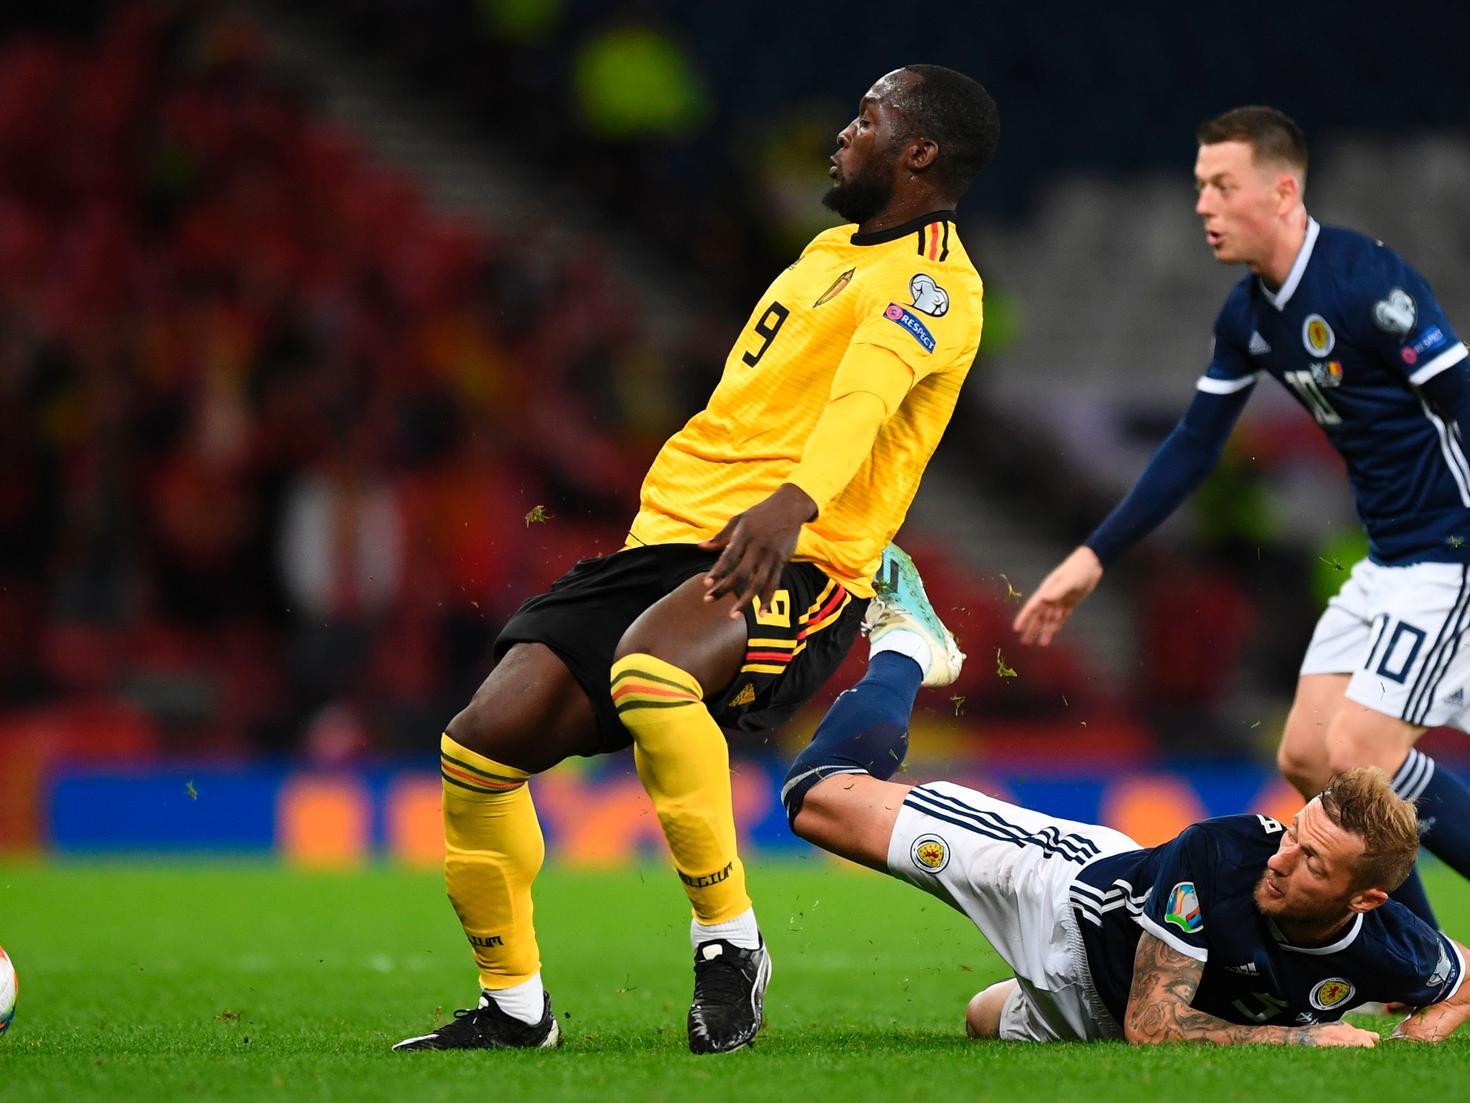 United captain Liam Cooper has withdrawn from the Scotland squad due to injury with Gjanni Alioski also missing out with Macedonia and Eddie Nketiah unable to play for England's under-21s Photo by ANDY BUCHANAN/AFP via Getty Images.